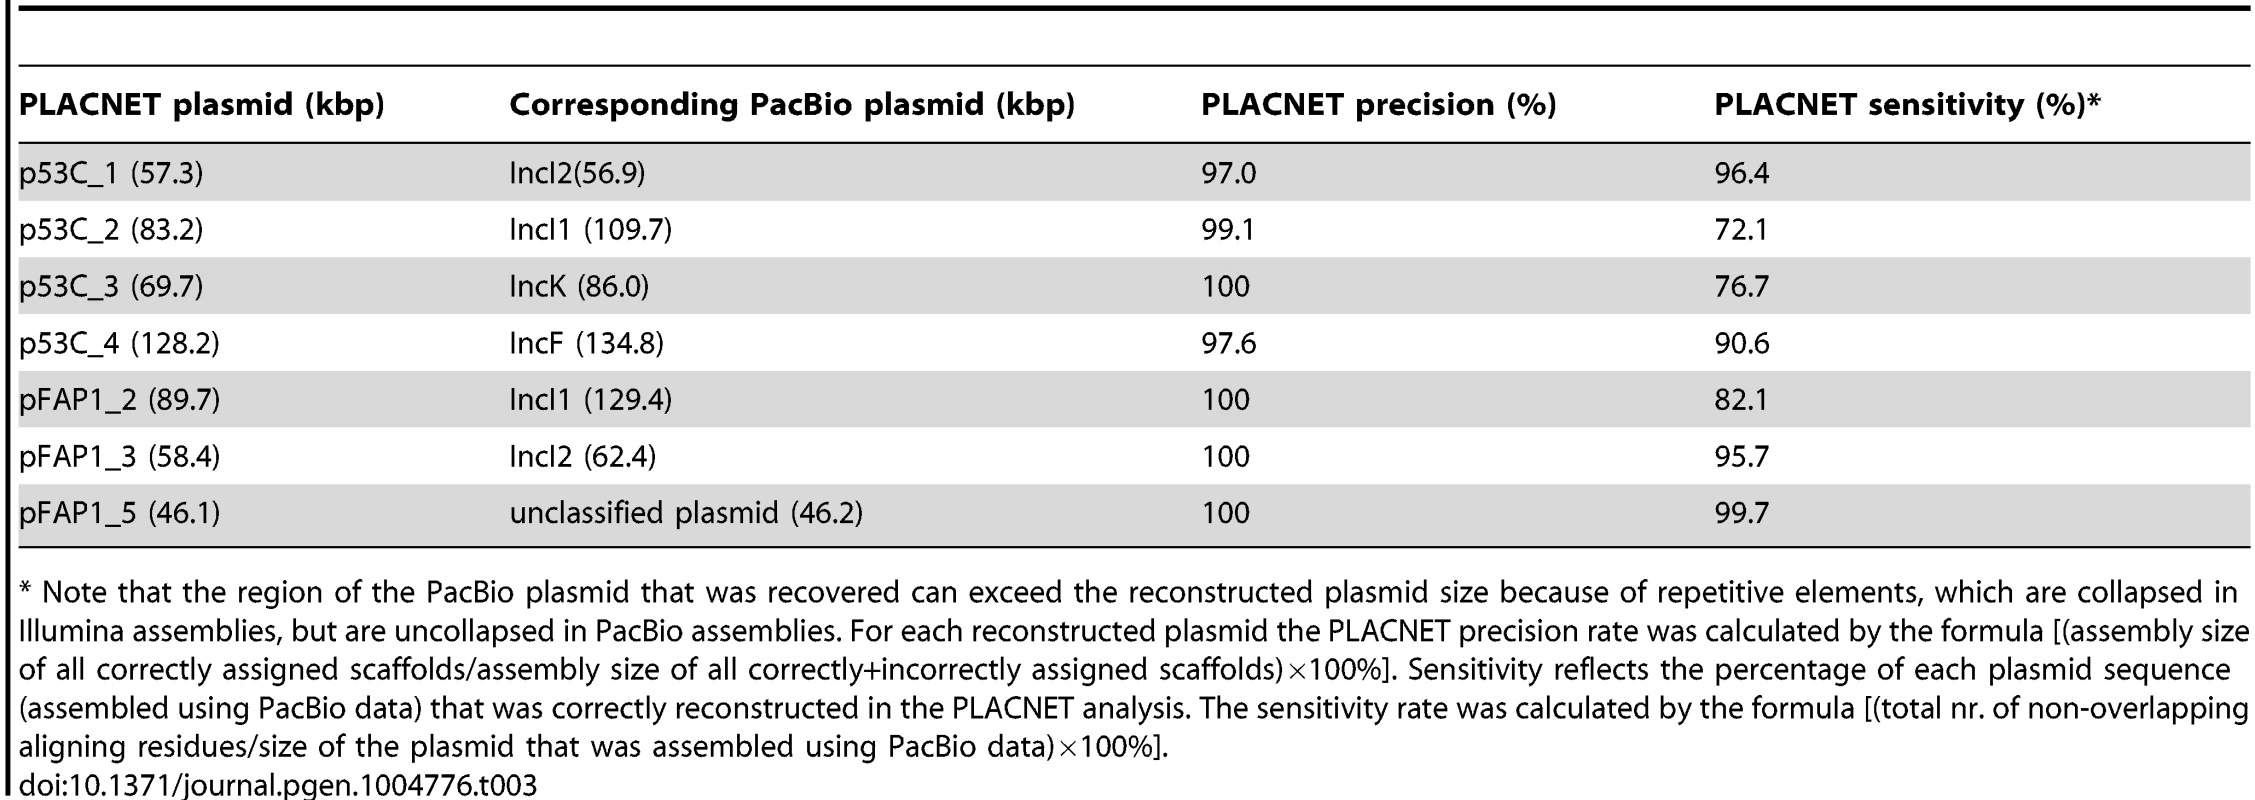 PLACNET precision and sensitivity rates for seven reconstructed plasmids.